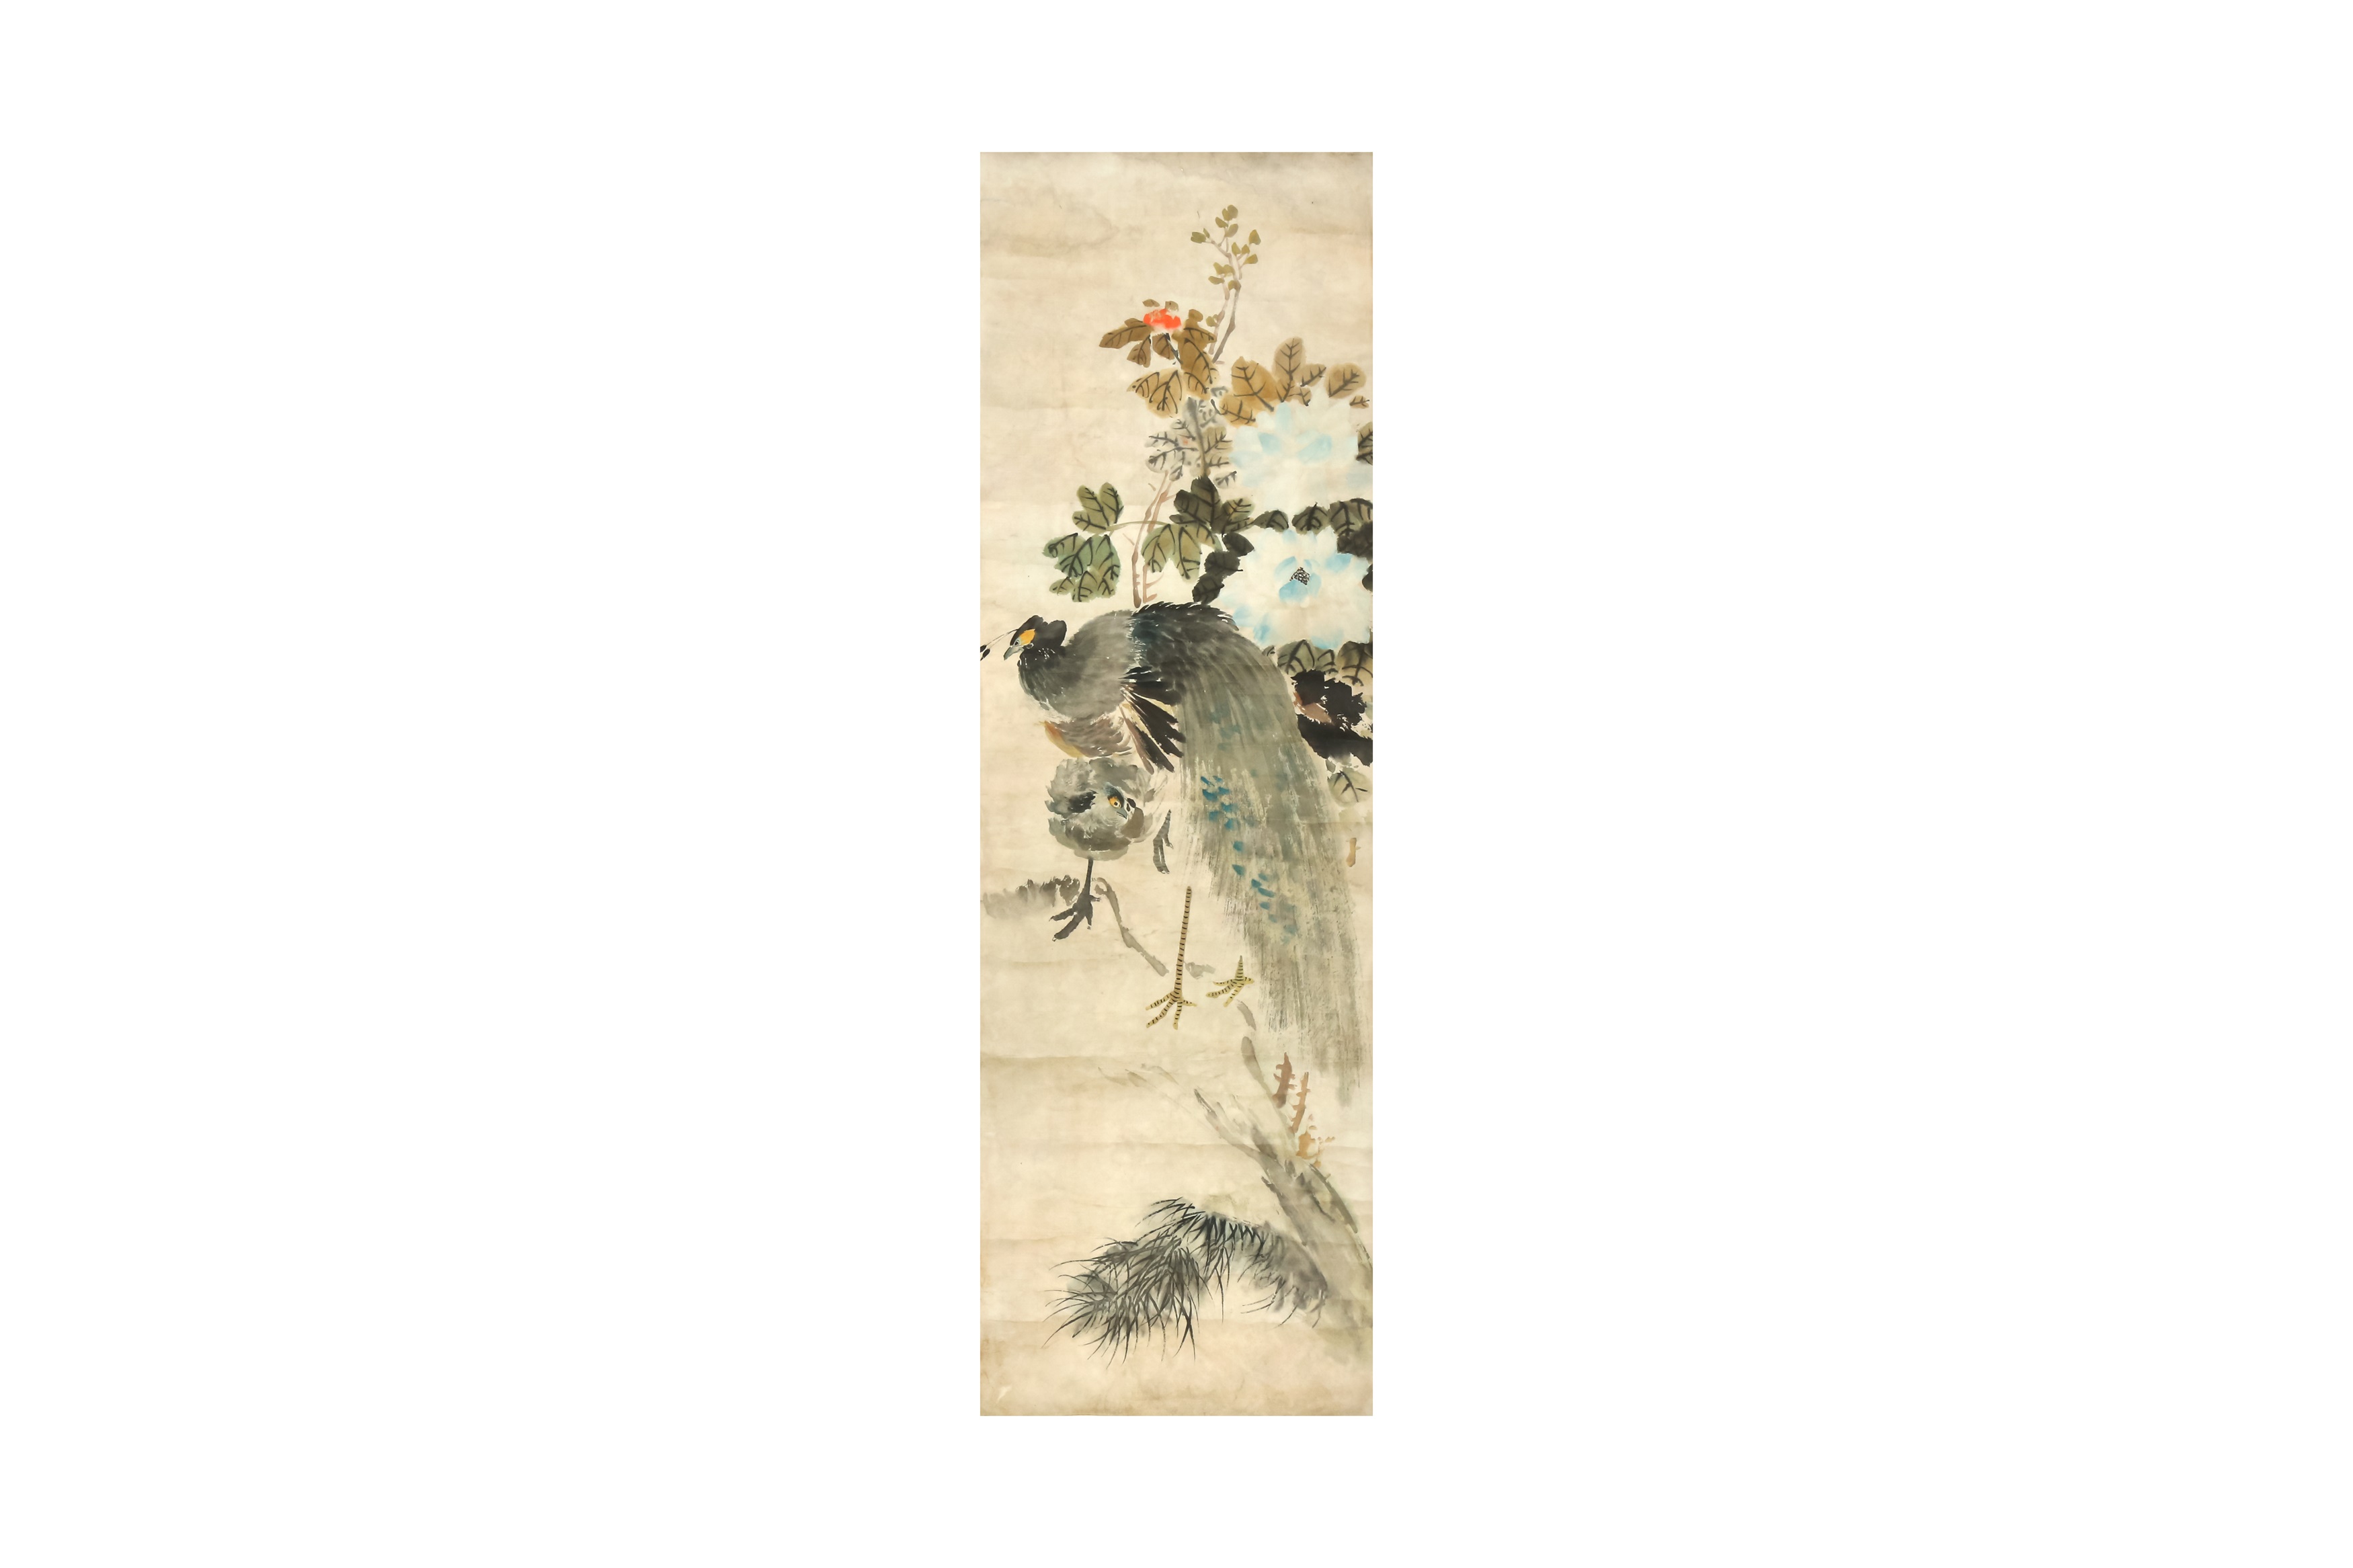 THREE CHINESE HANGING SCROLL PAINTINGS 二十世紀 掛軸三幅 - Image 7 of 8